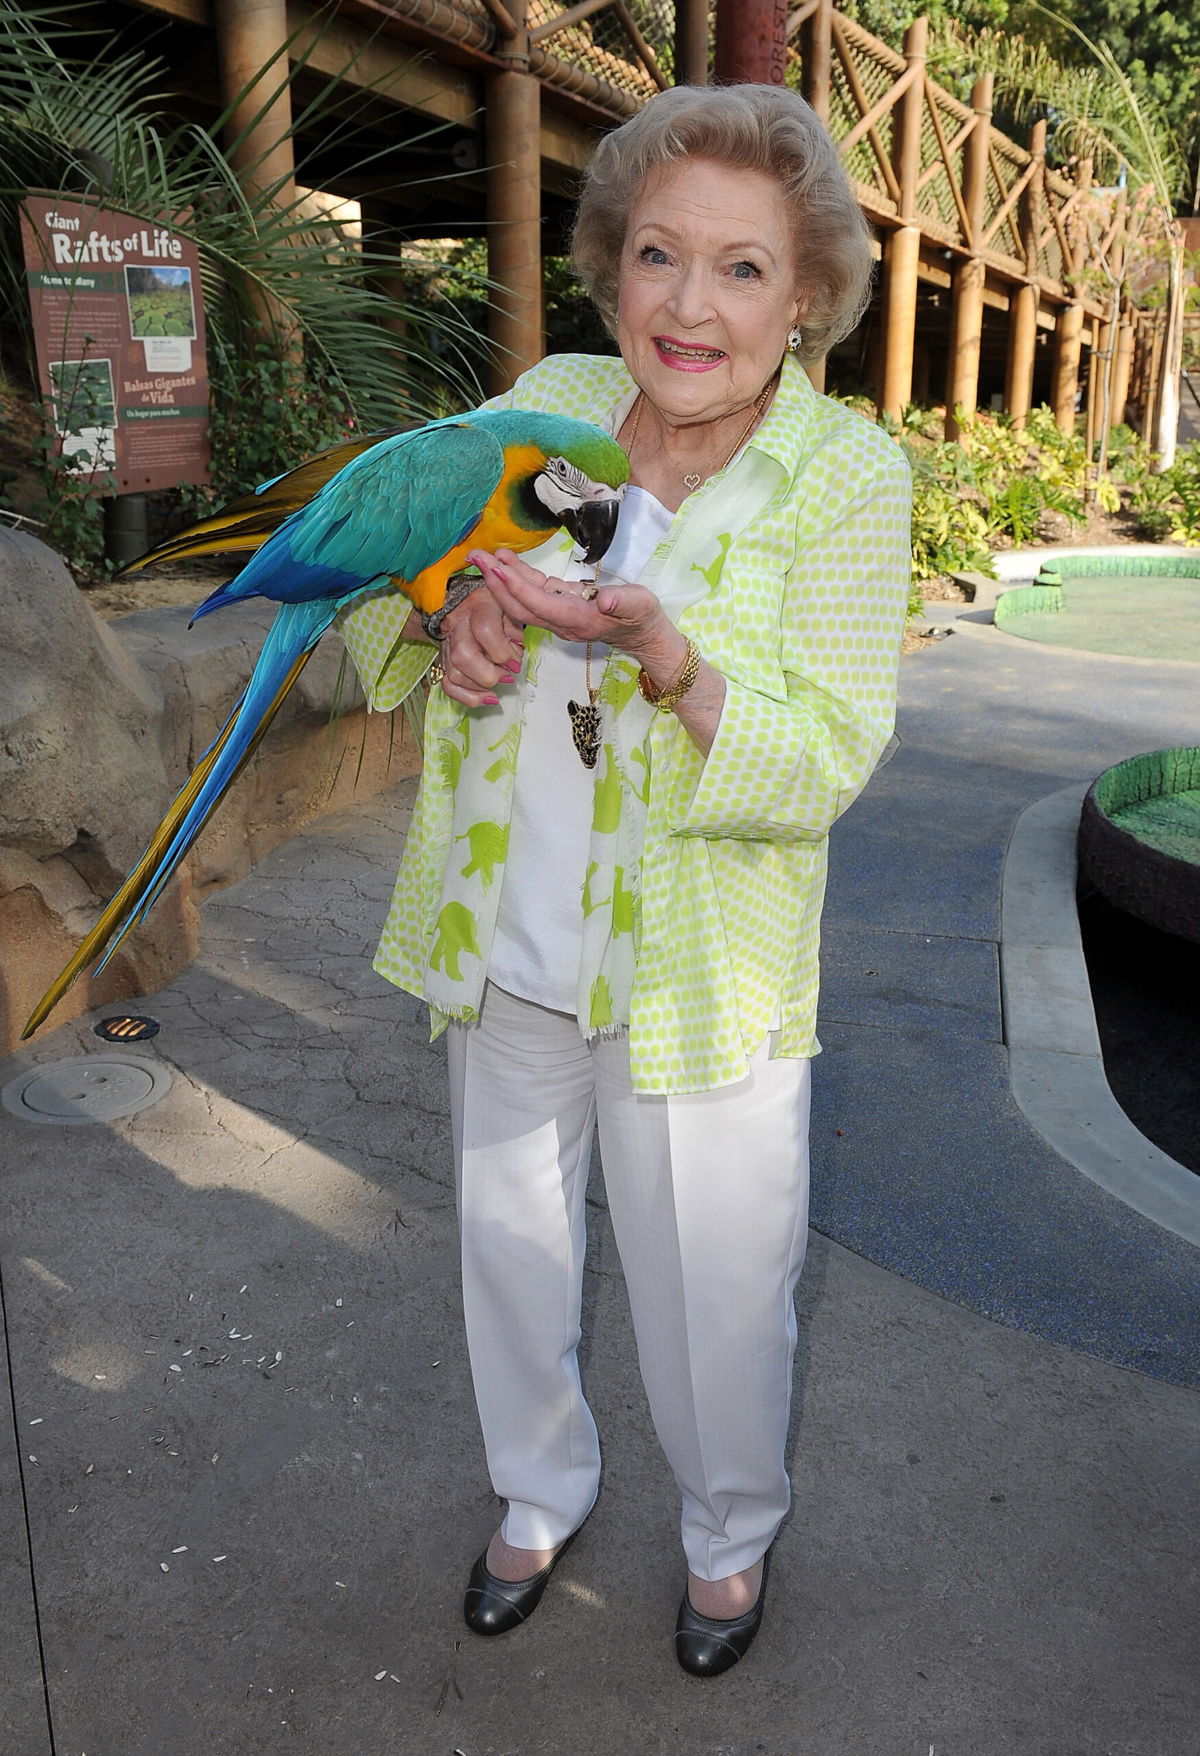 <i>Angela Weiss/Getty Images</i><br/>Actress Betty White attends the Greater Los Angeles Zoo Association's (GLAZA) 44th Annual Beastly Ball at Los Angeles Zoo on June 14